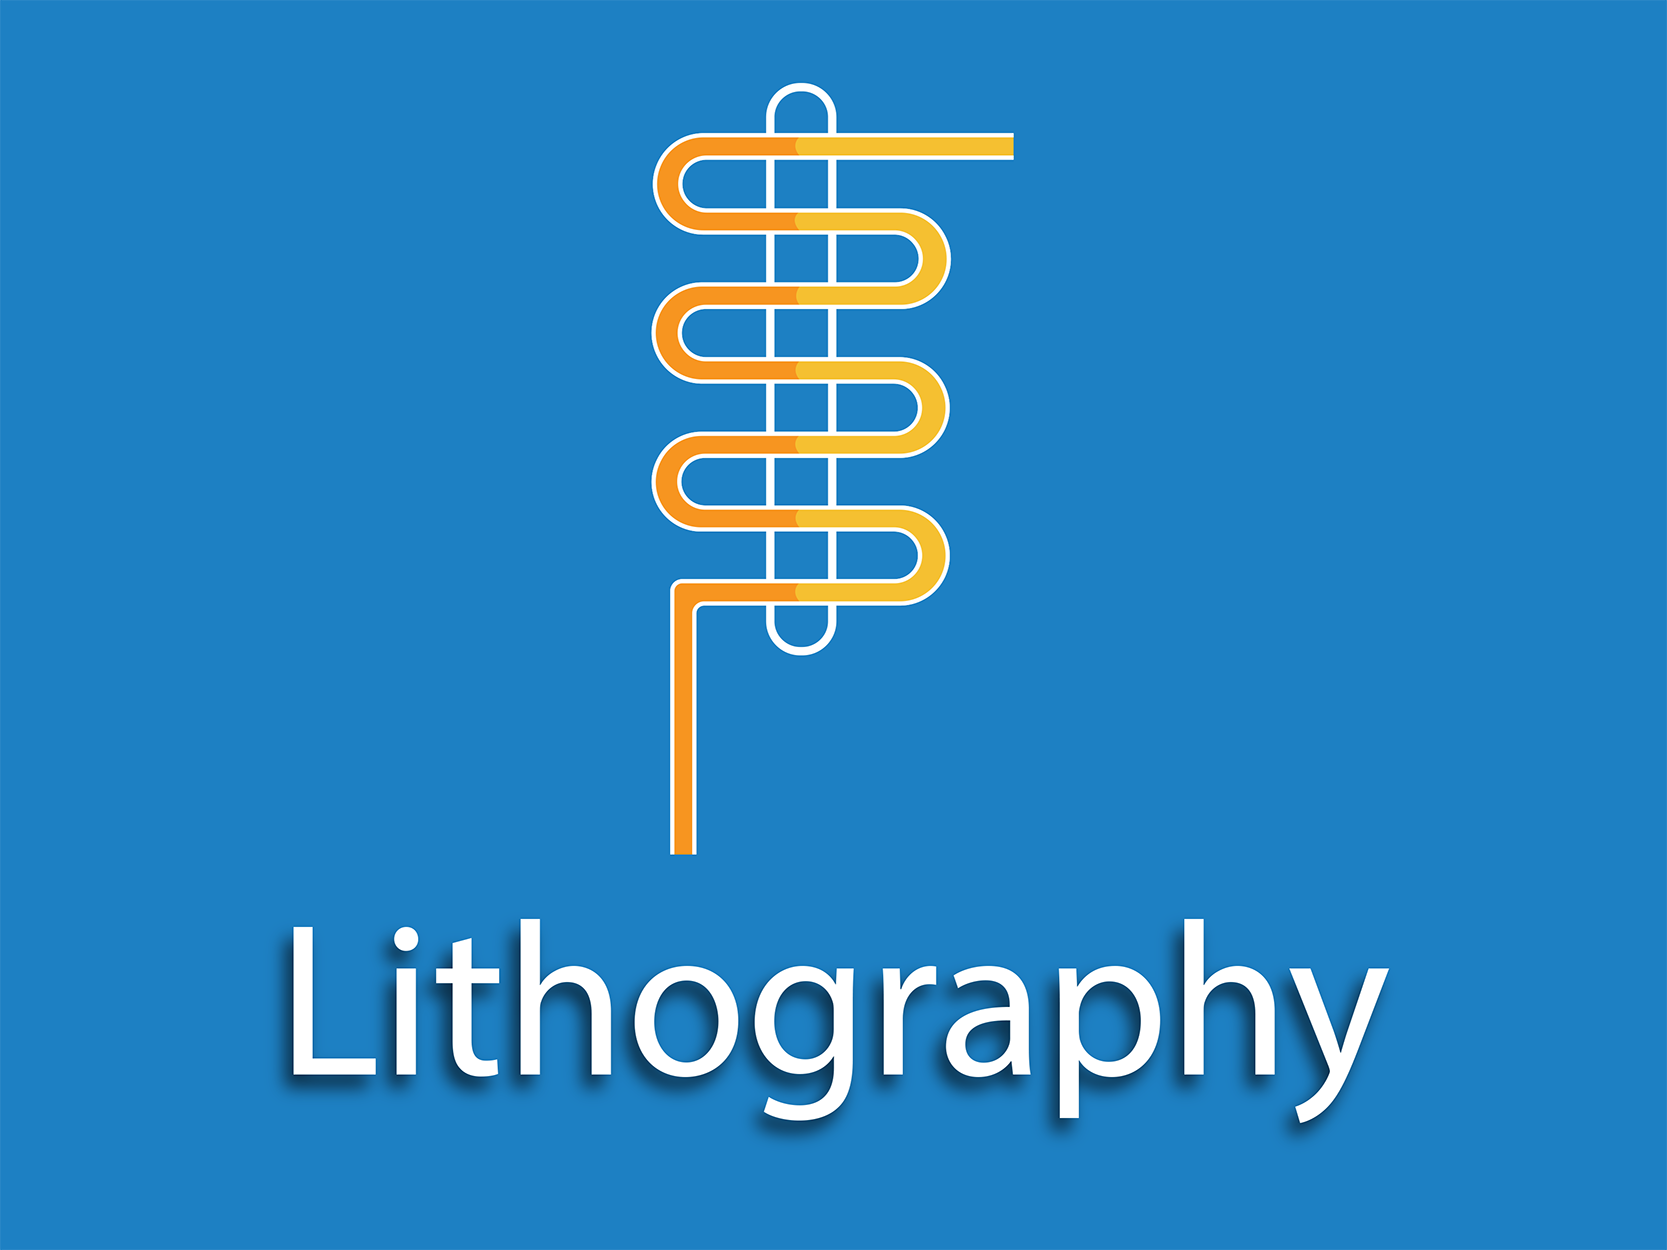 Click here to see the full list of lithography tools